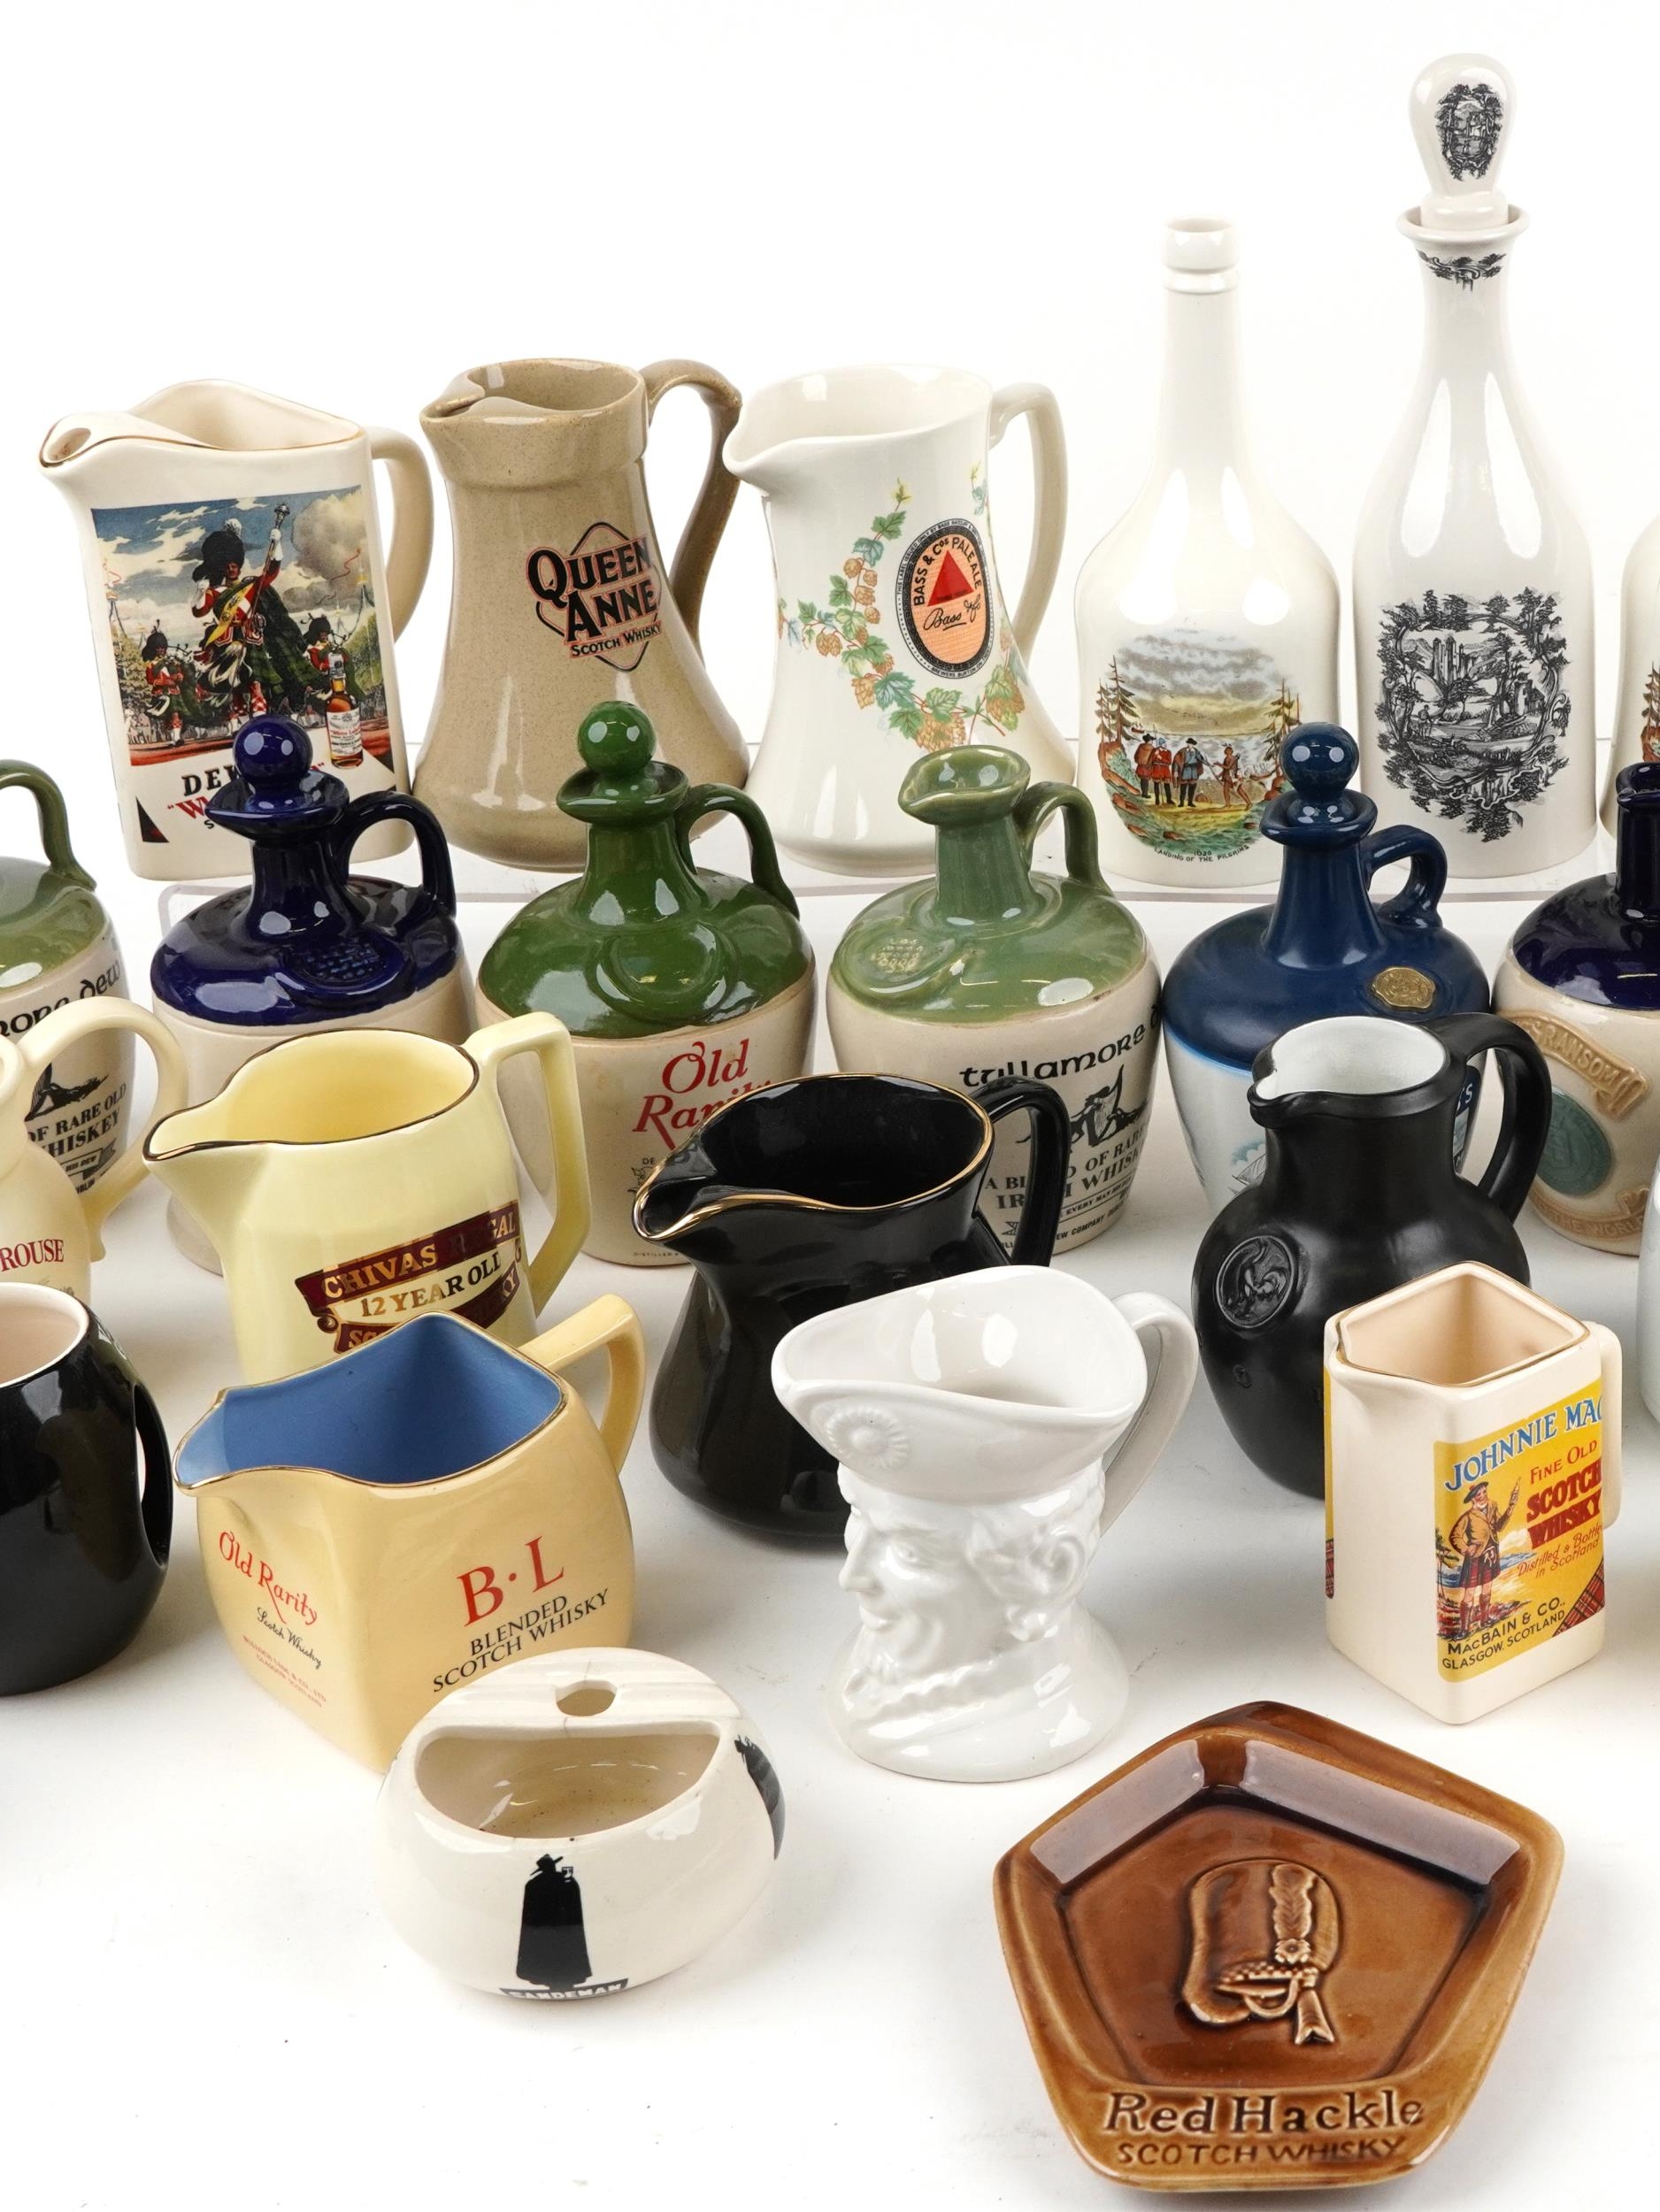 Extensive collection of breweriana interest advertising jugs and flagons including Jamieson, - Image 3 of 4